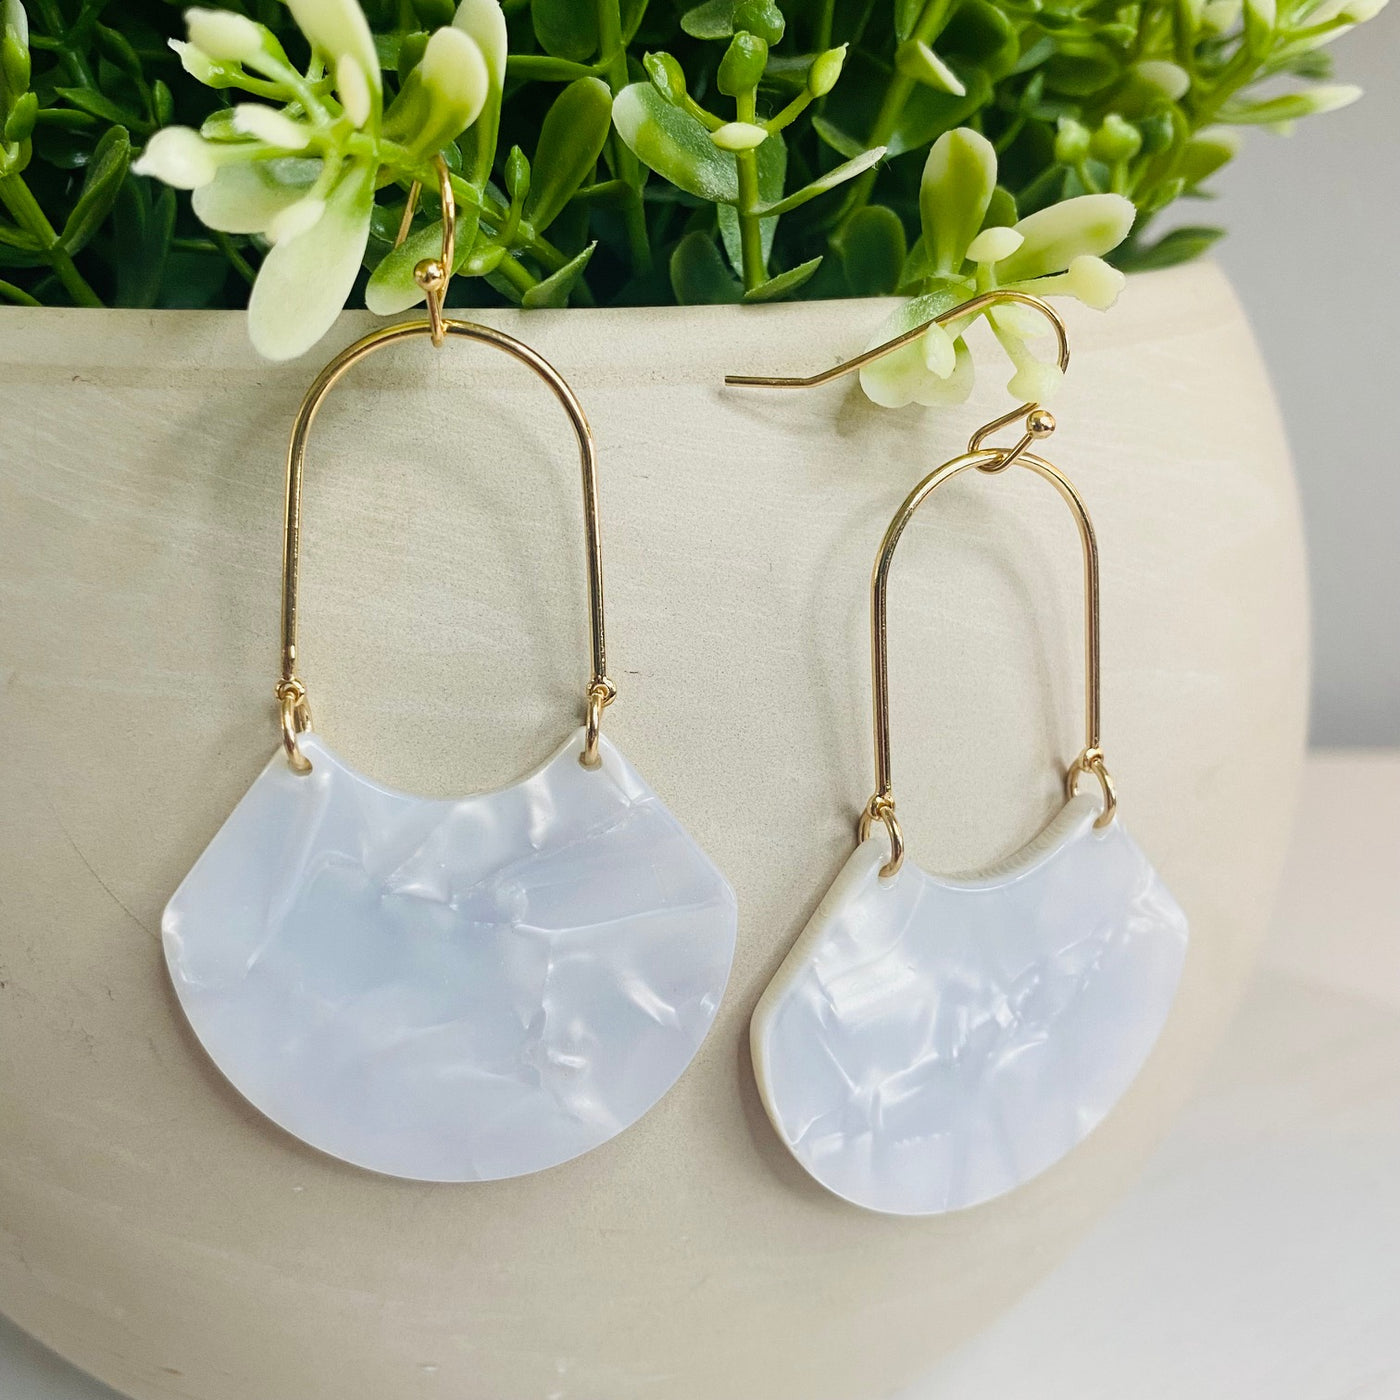 An open oval drop hoop earring with gold hardware and a white marble acetate finish displayed hung on the greenery of a faux plant.